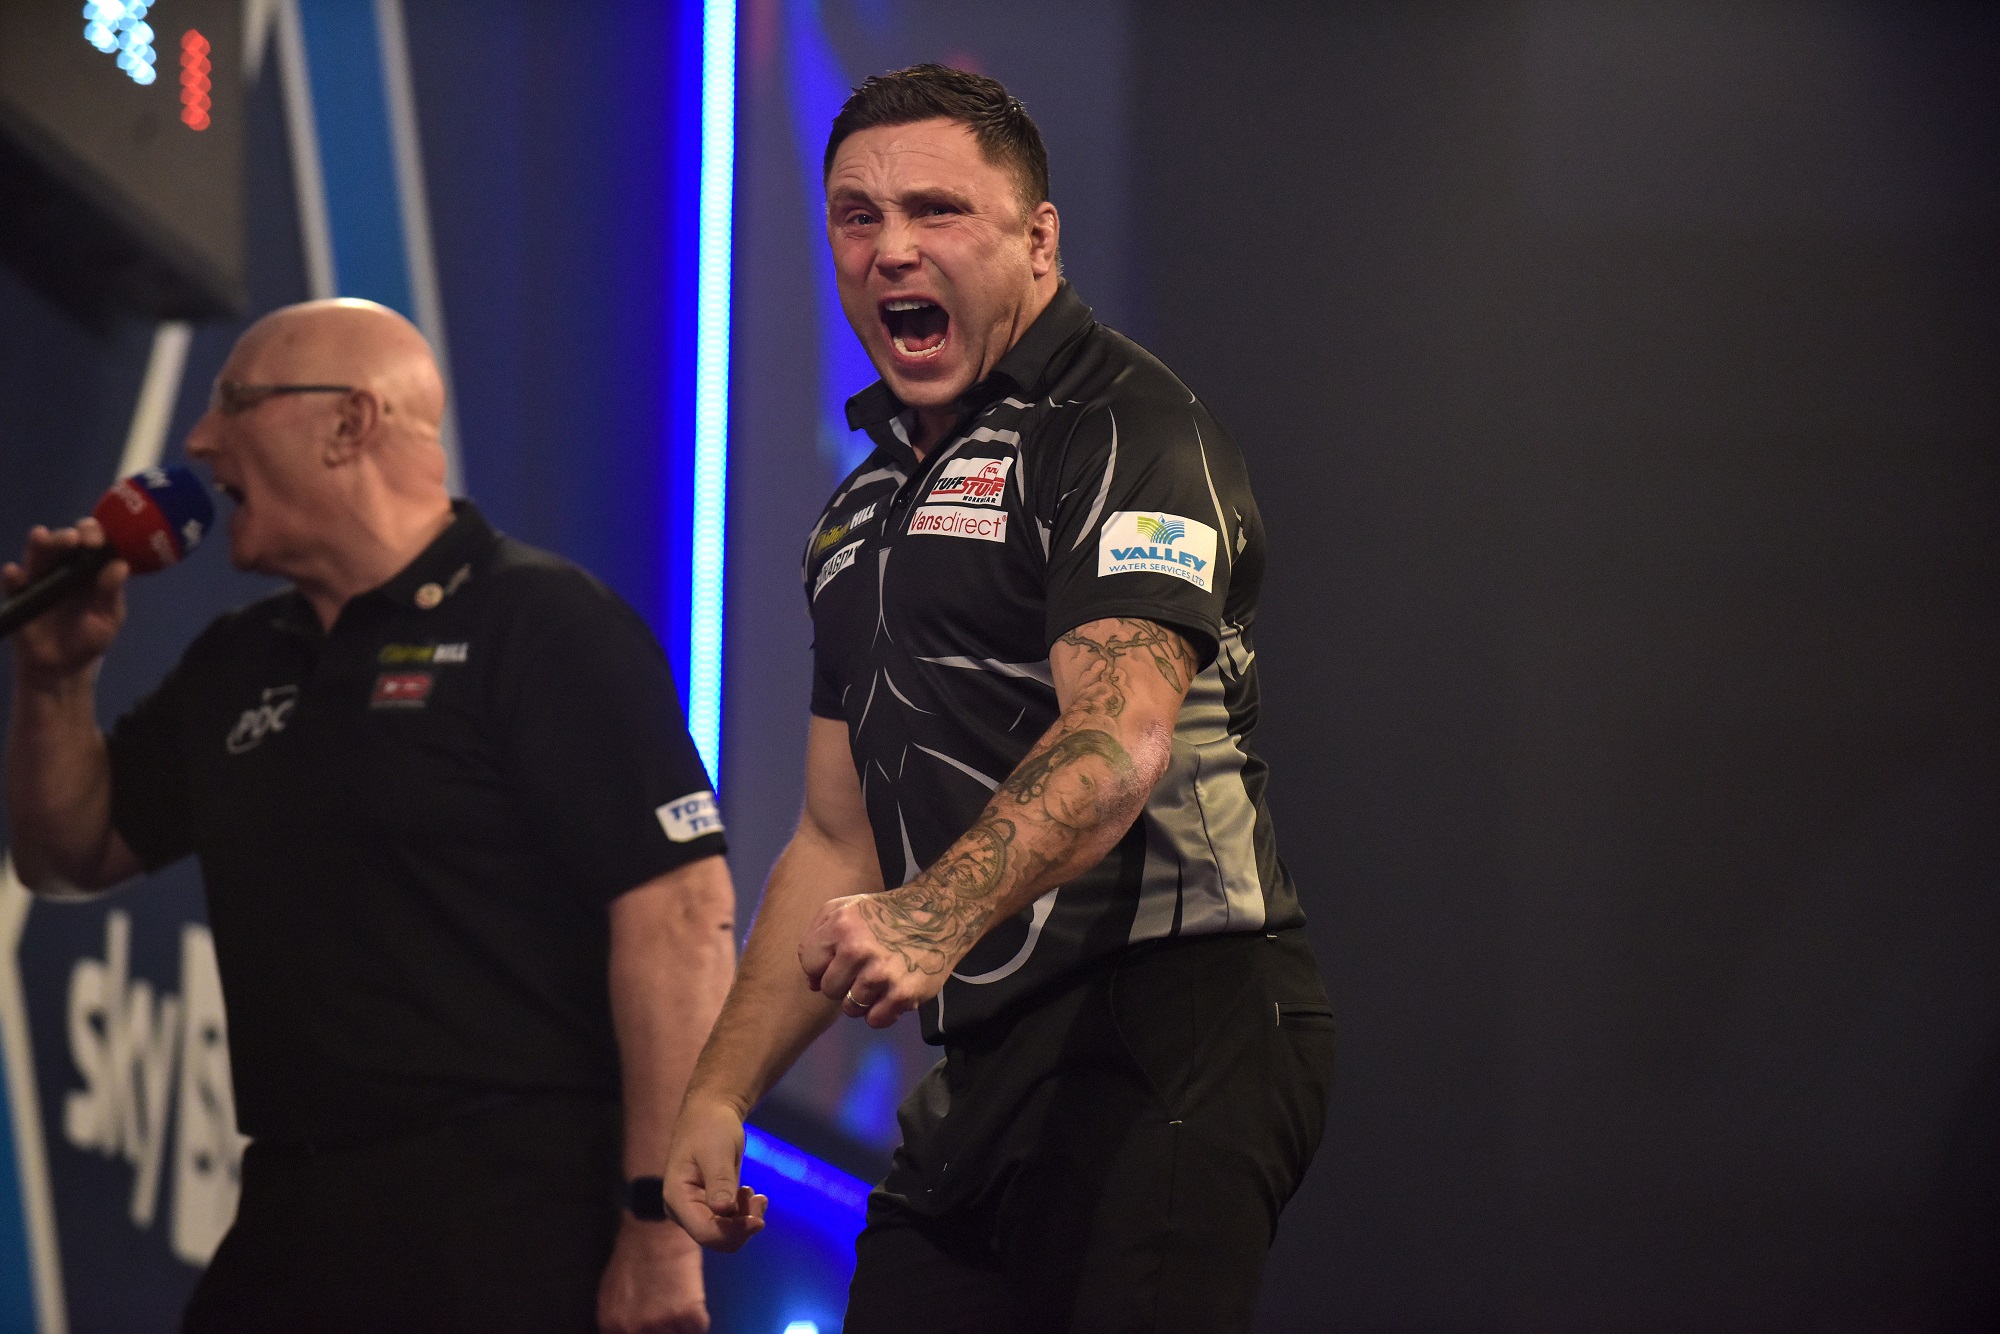 Gerwyn Price playing at the PDC World Darts Championship Final